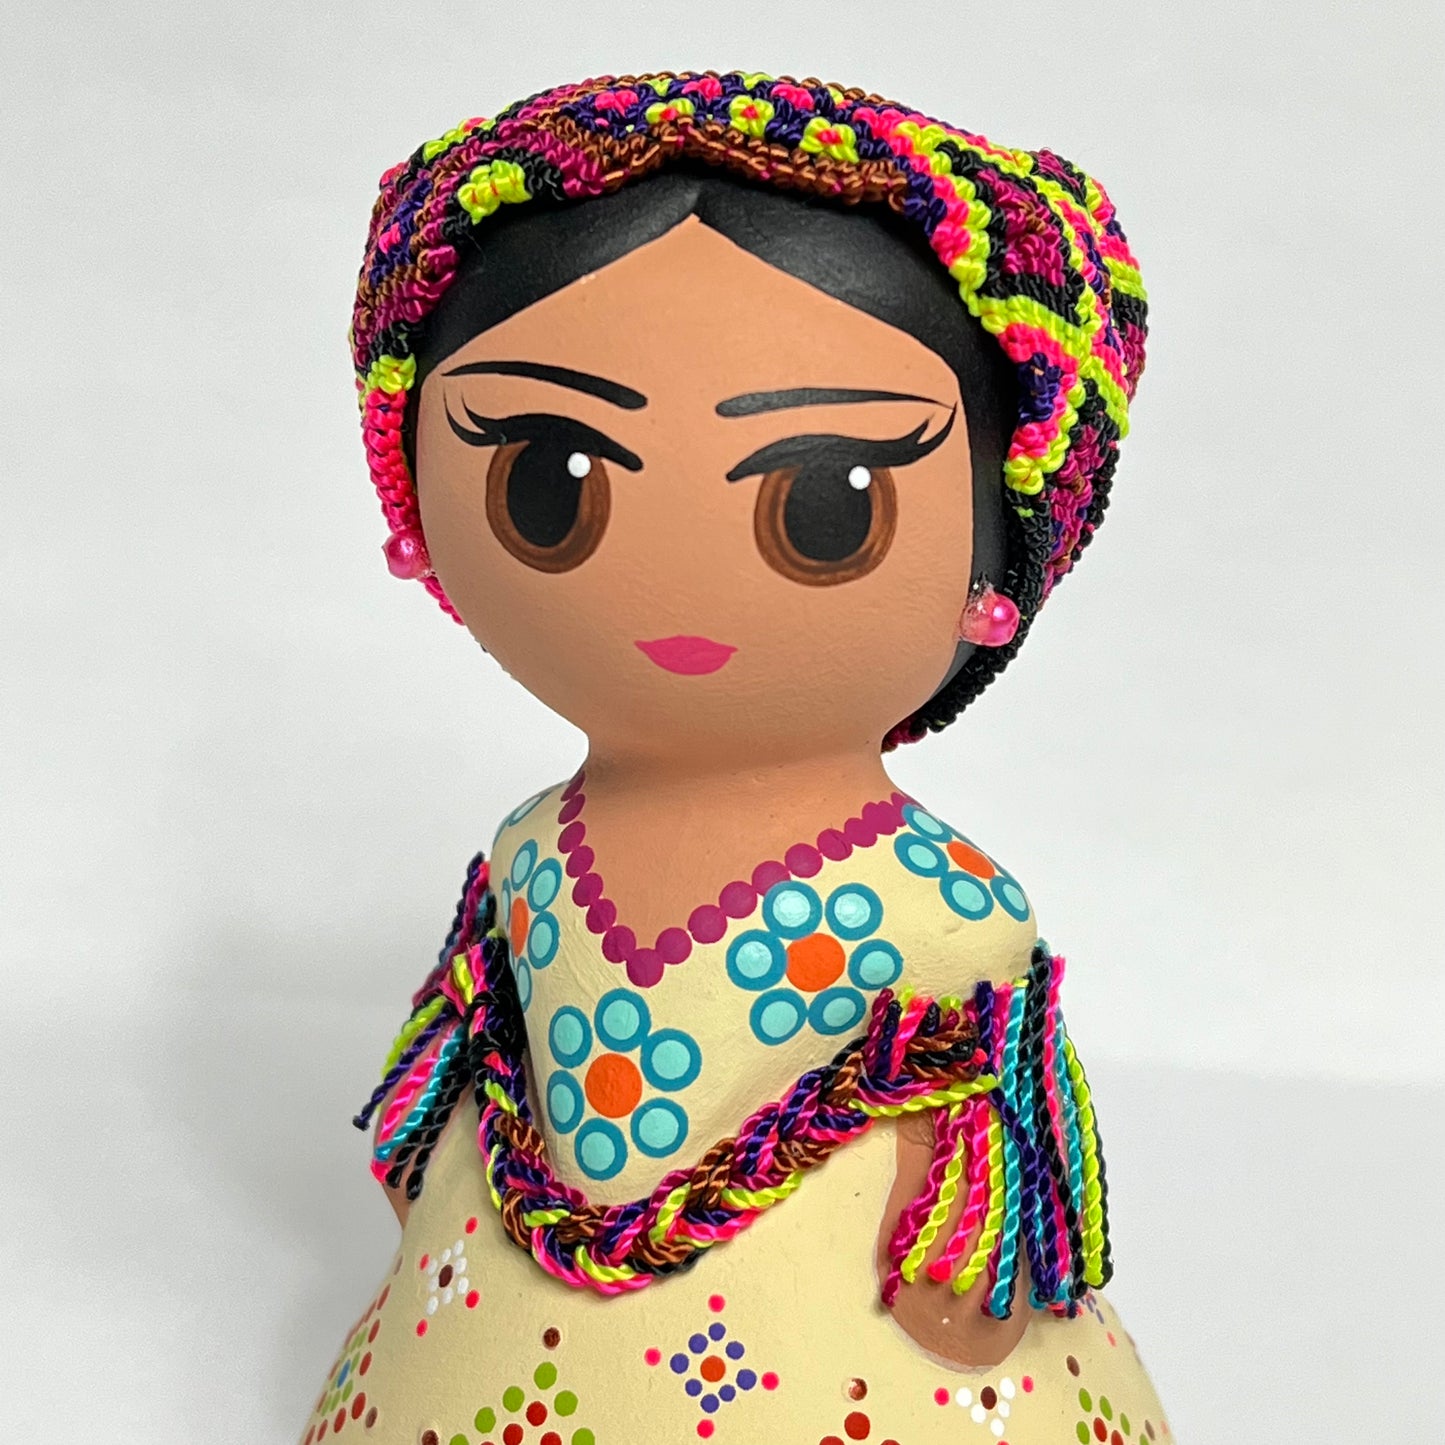 Mexican Handmade Clay Folklore Figurines- Nayarit MeXican Artisan Fashion & Design